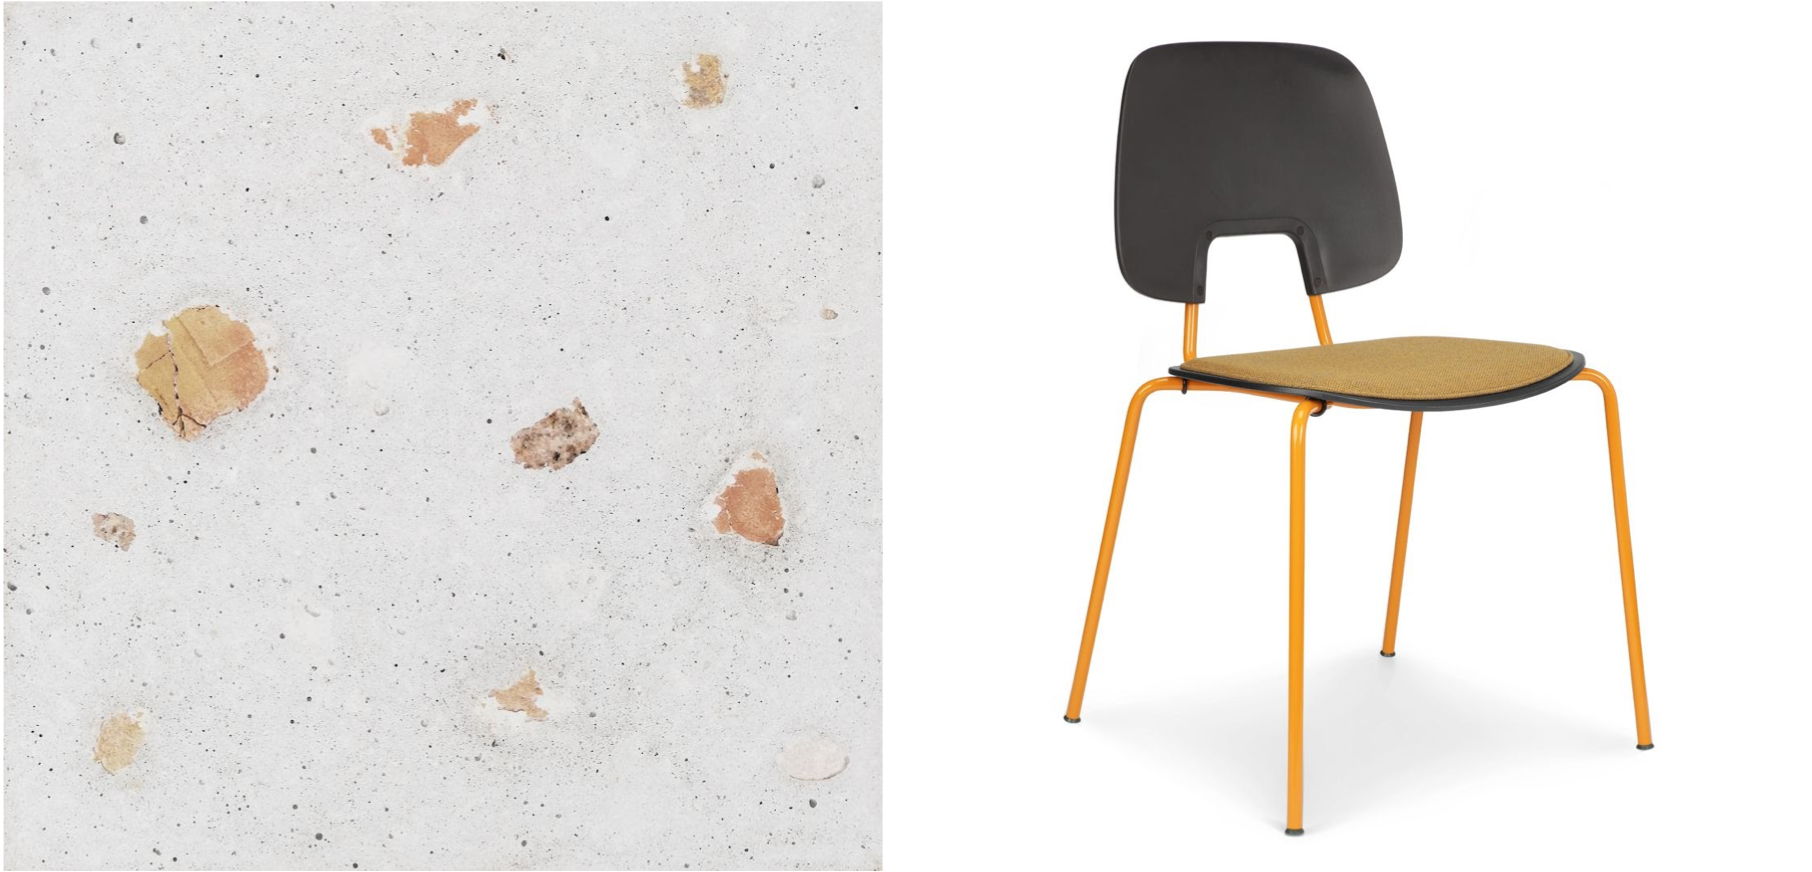 Above left: Gast tile using discarded stone masonry materials by Genfärd. Right: R.U.M chair made using sea plastic by Wehlers